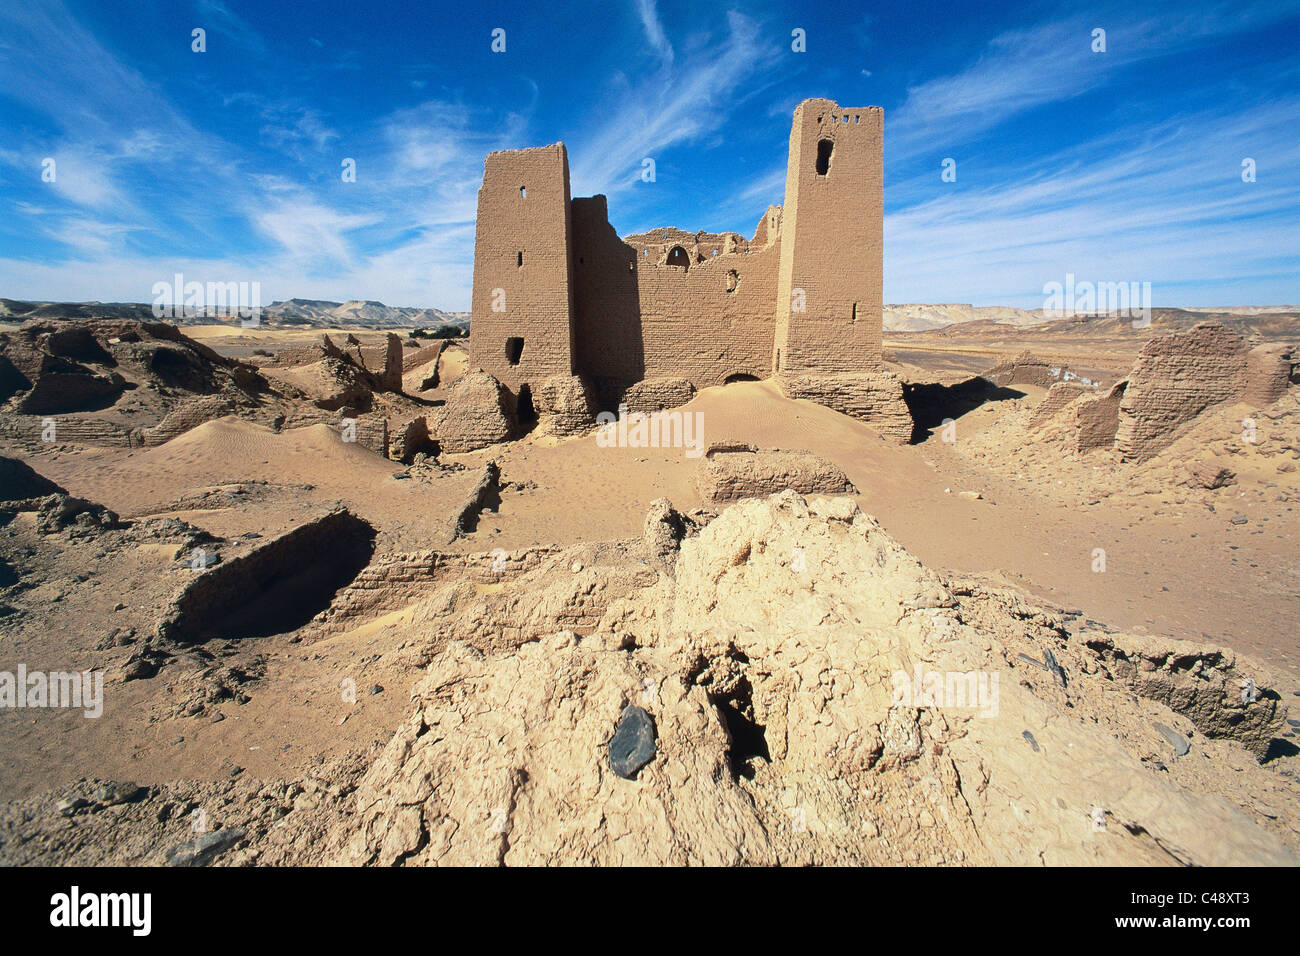 Photograph of the ruins of an ancient castle in the western desert of Egypt Stock Photo